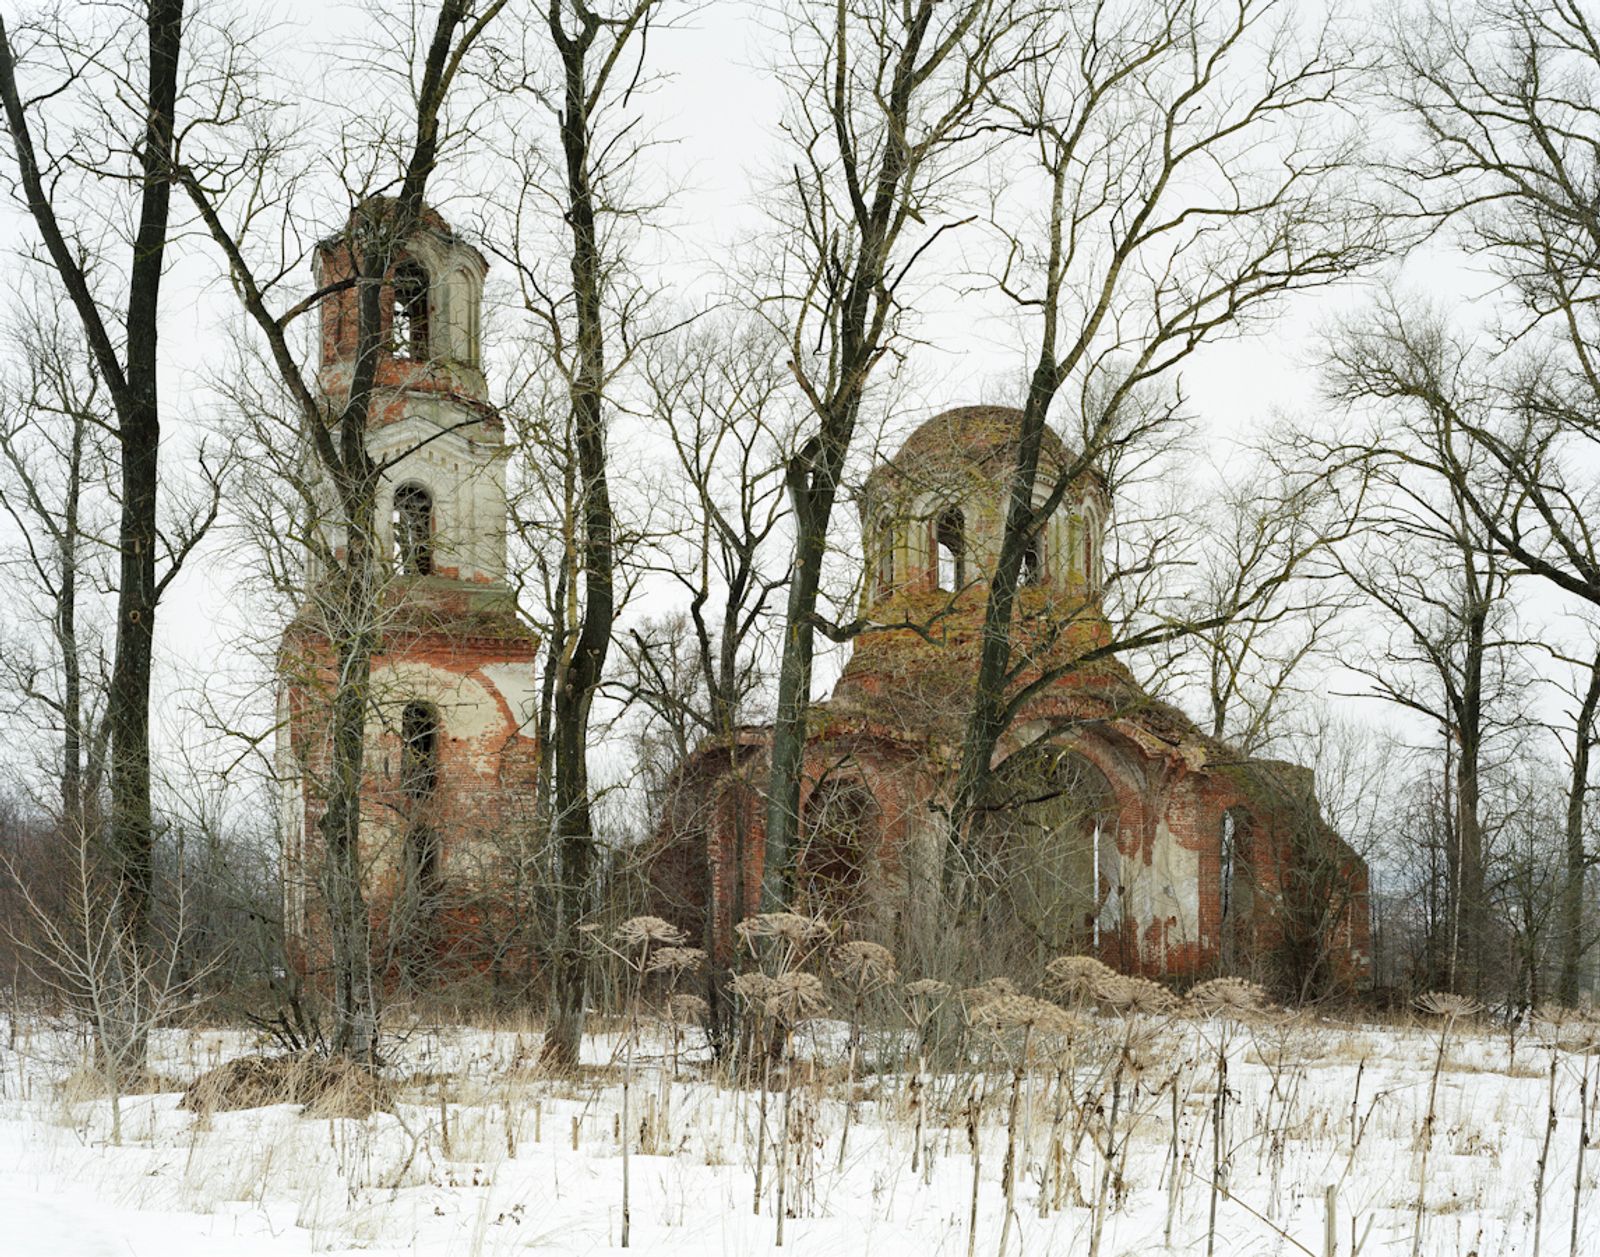 © Petr Antonov - Church of Nicetah the Martyr in the village of Kazarinovo. The church was built in 1904 and closed in 1934.